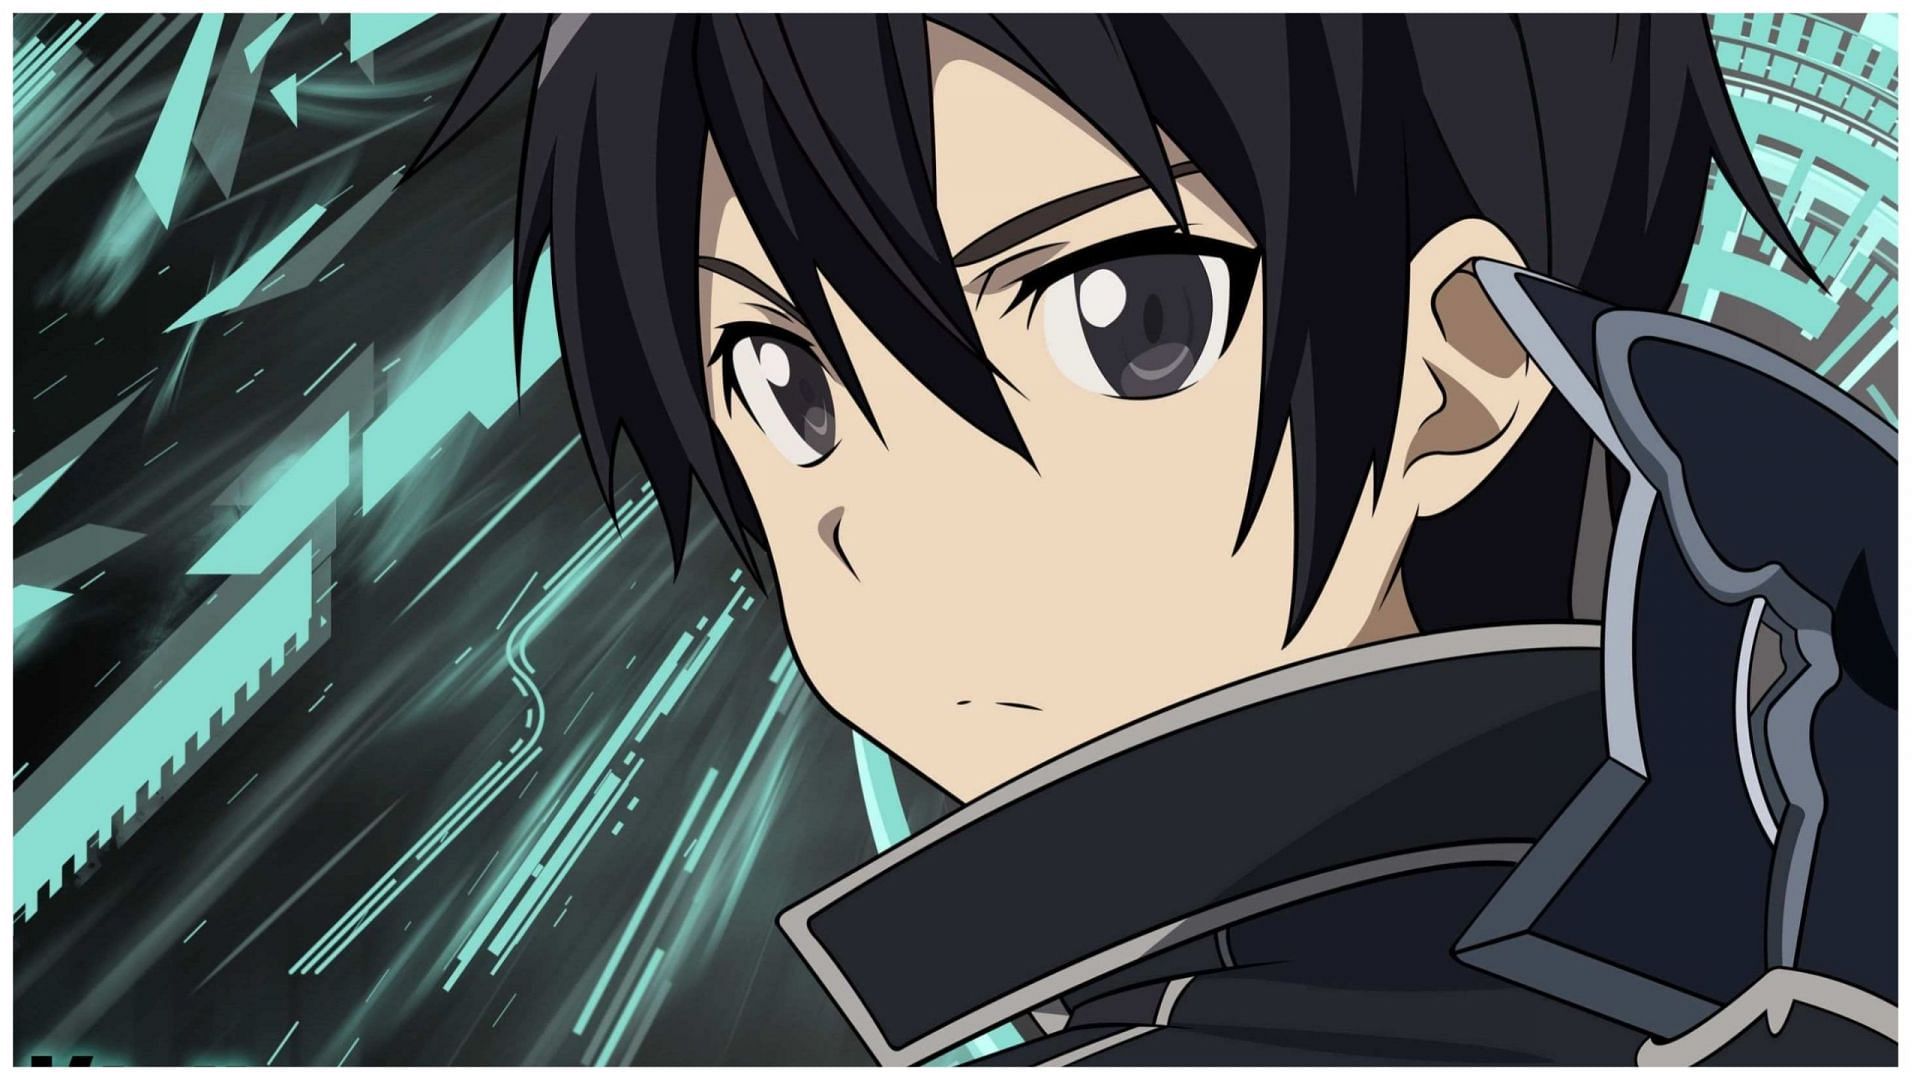 The main anime protagonist from Sword Art Online (Image via A-1 Pictures)